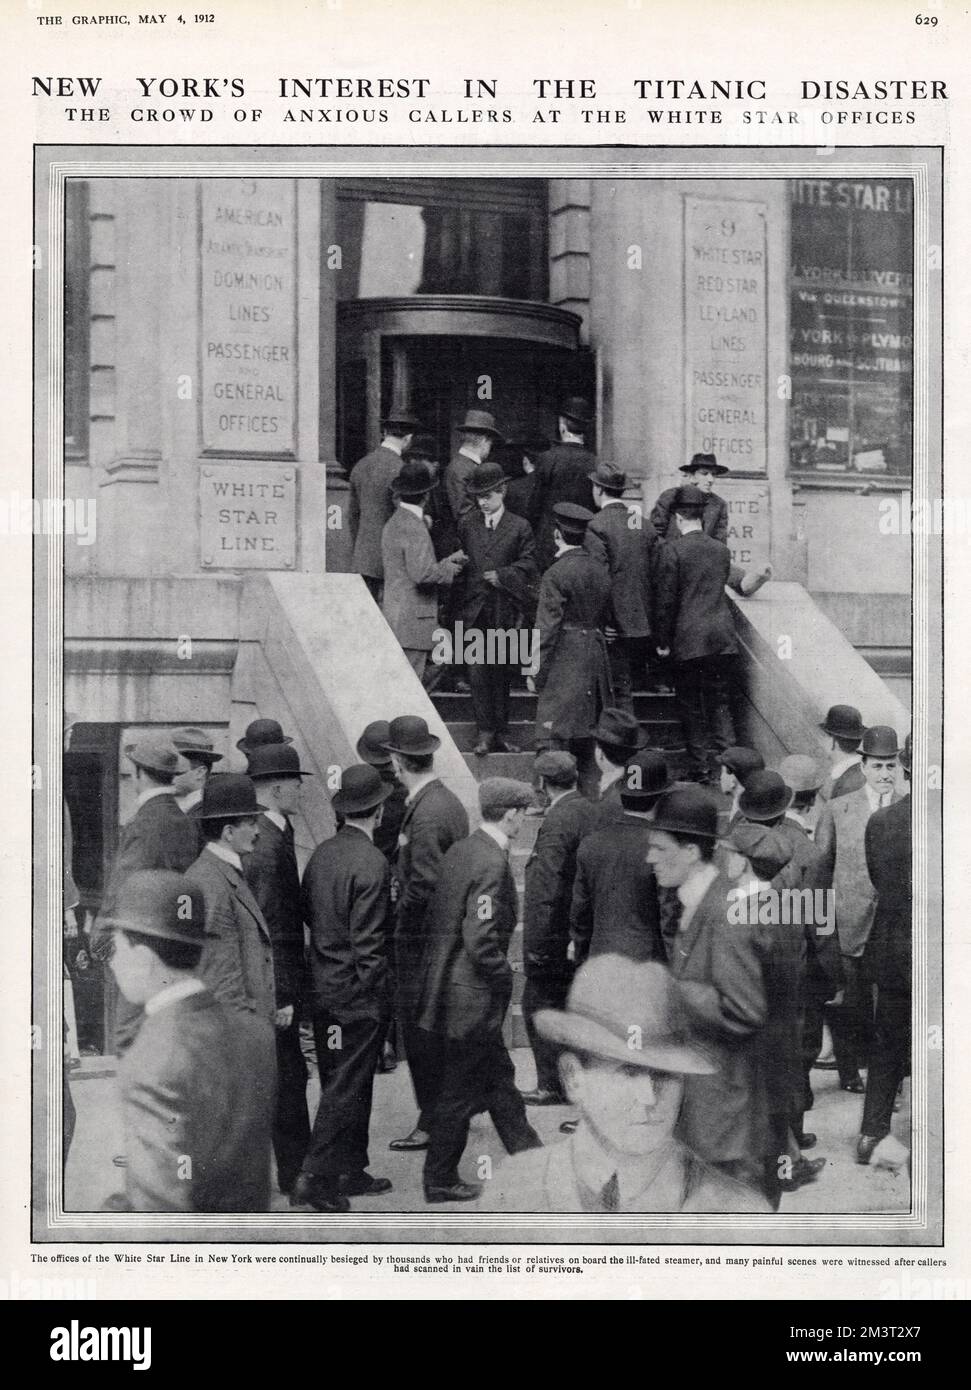 New York's interest in the TItanic disaster: the crowd of anxious callers at the White Star Line offices in New York, which was continuously besieged by thousands who had friends or relatives on board the ill-fated steamer. There were many painful scenes witnessed after callers had scanned in vain the list of survivors. Stock Photo